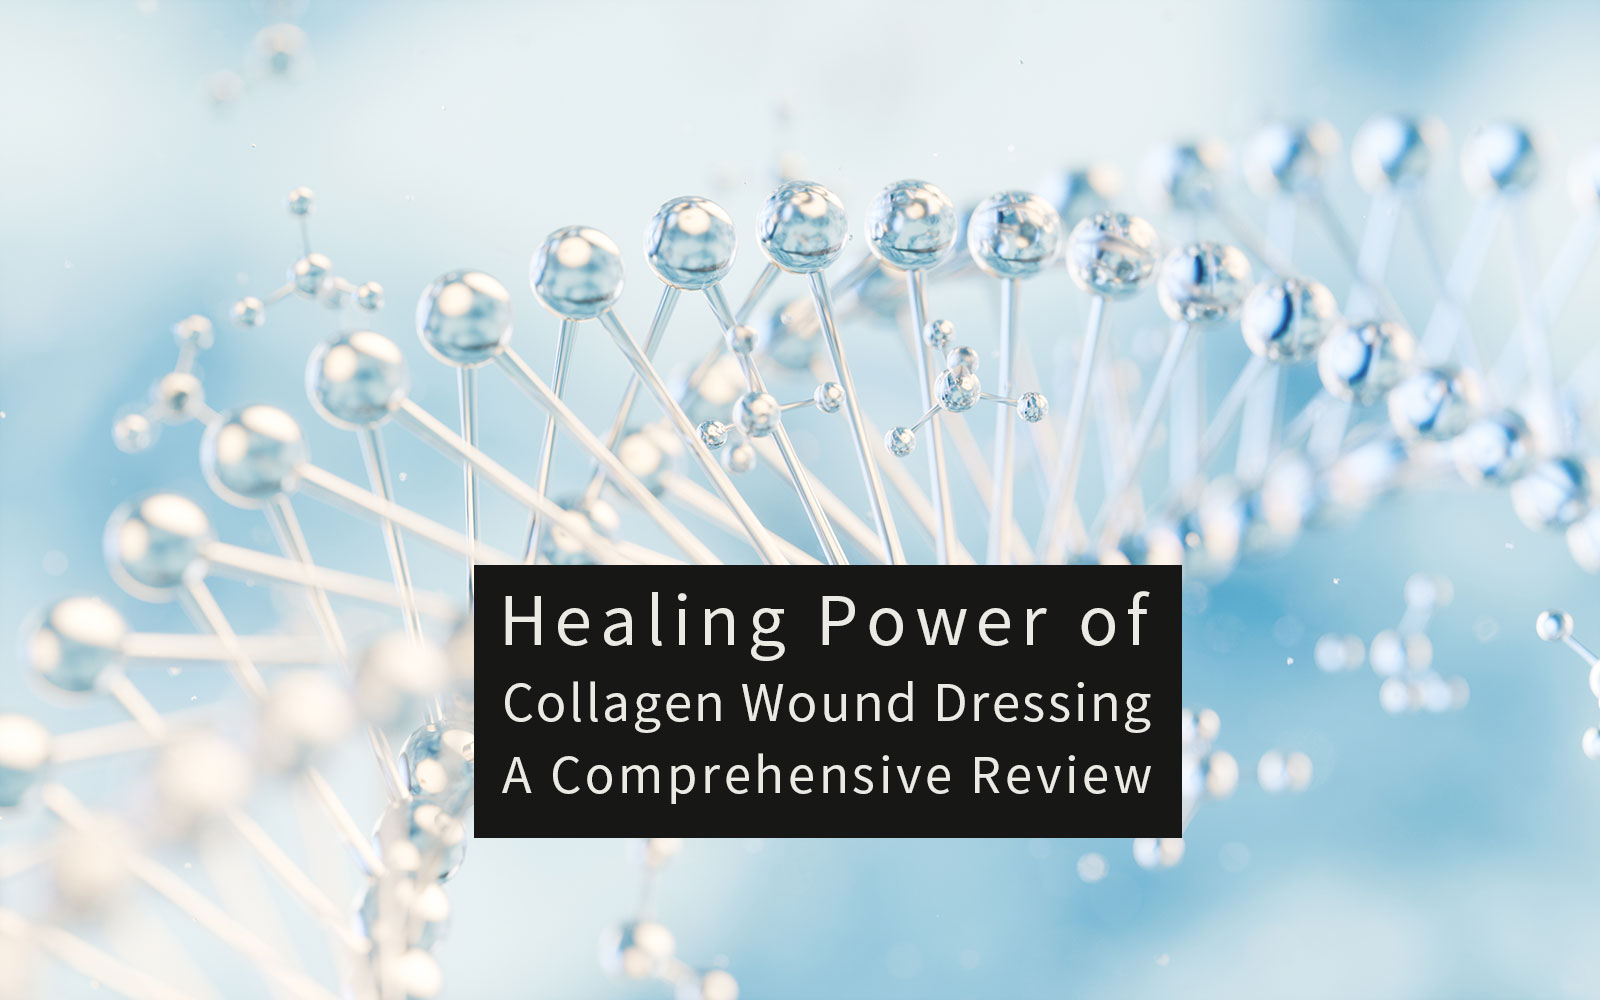 Healing_Power_of_Collagen_Wound_Dressing_A_Comprehensive_Review